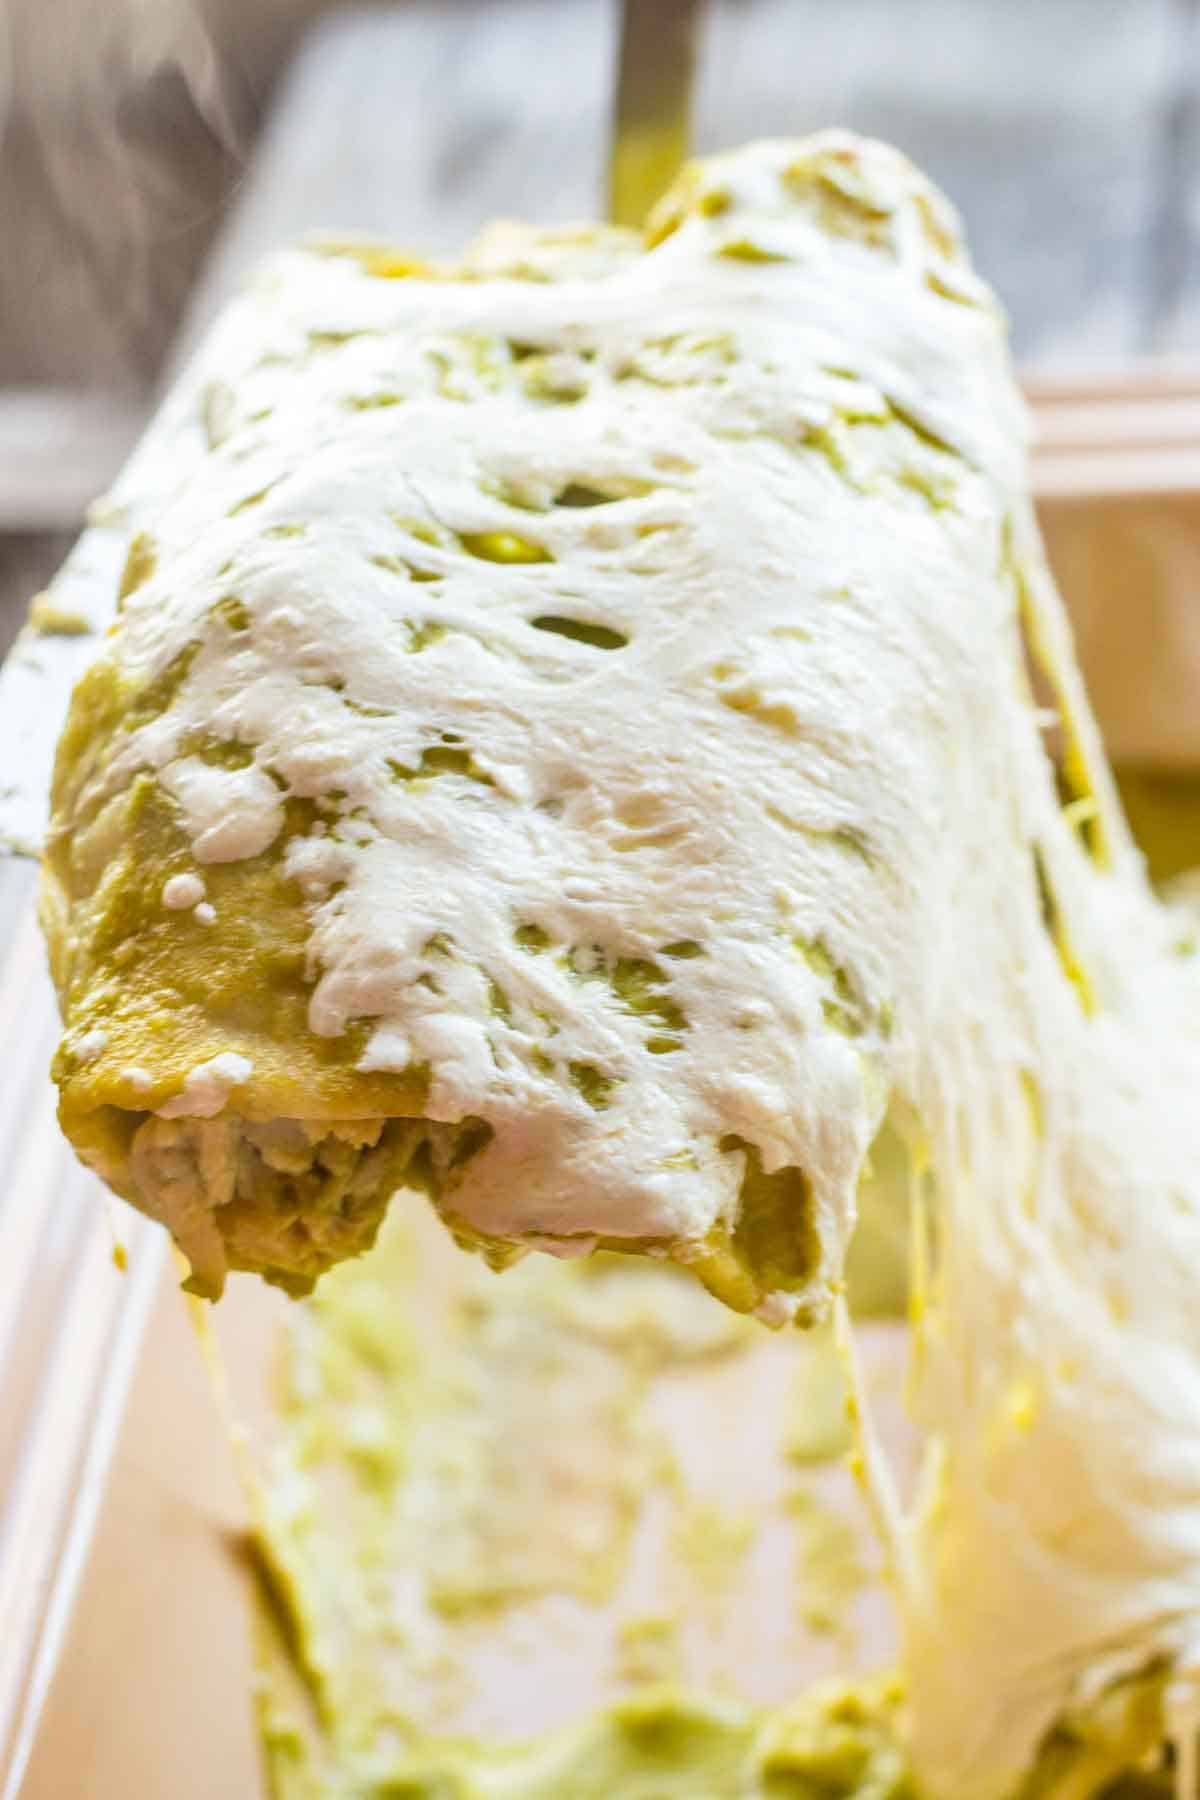 A spatula removing two enchiladas verdes from a tray with lots of stringy cheese.